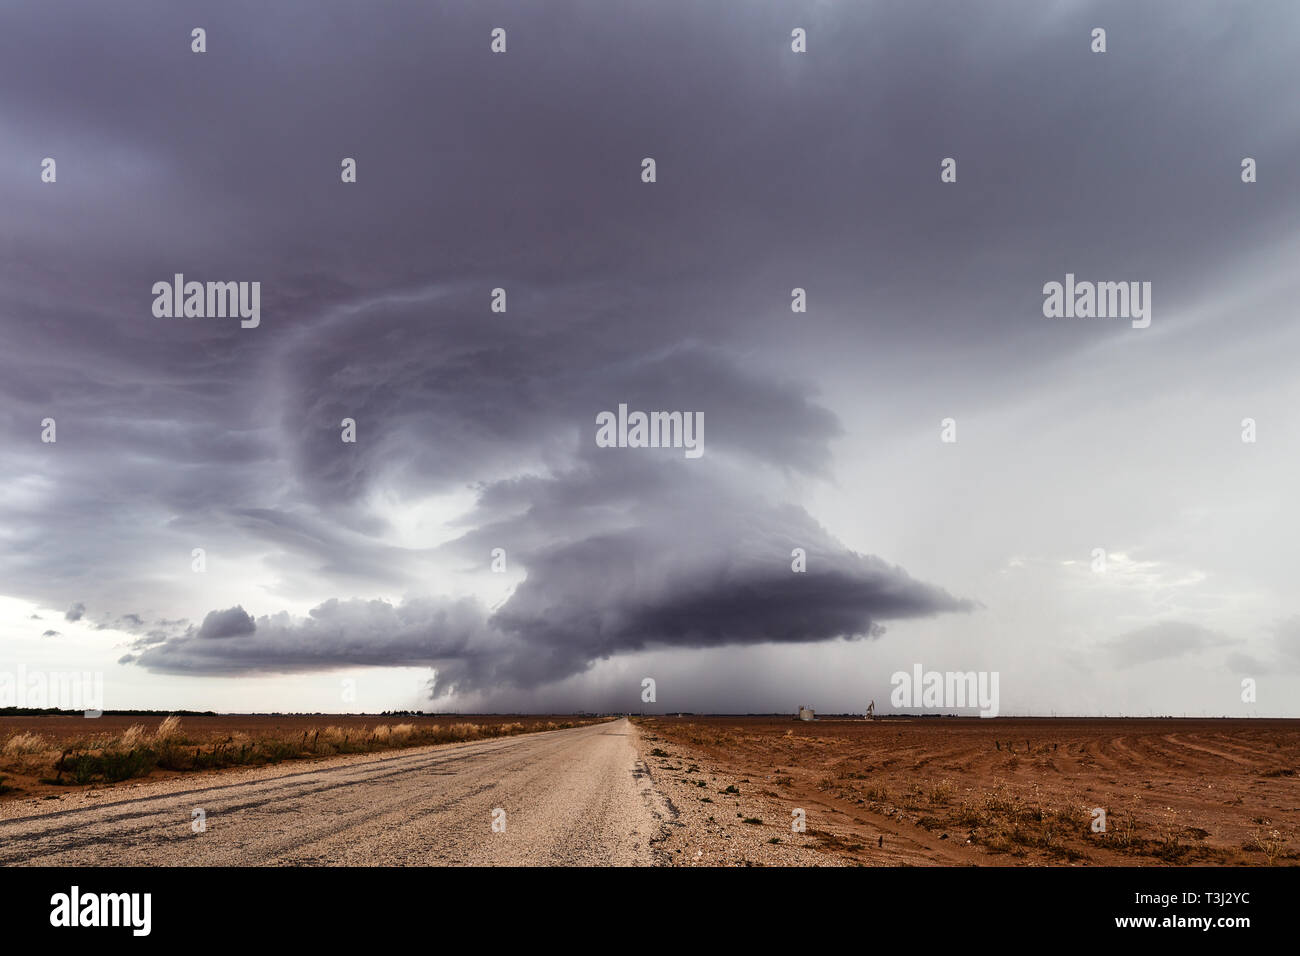 Supercell storm with dramatic clouds near Ackerly, Texas Stock Photo